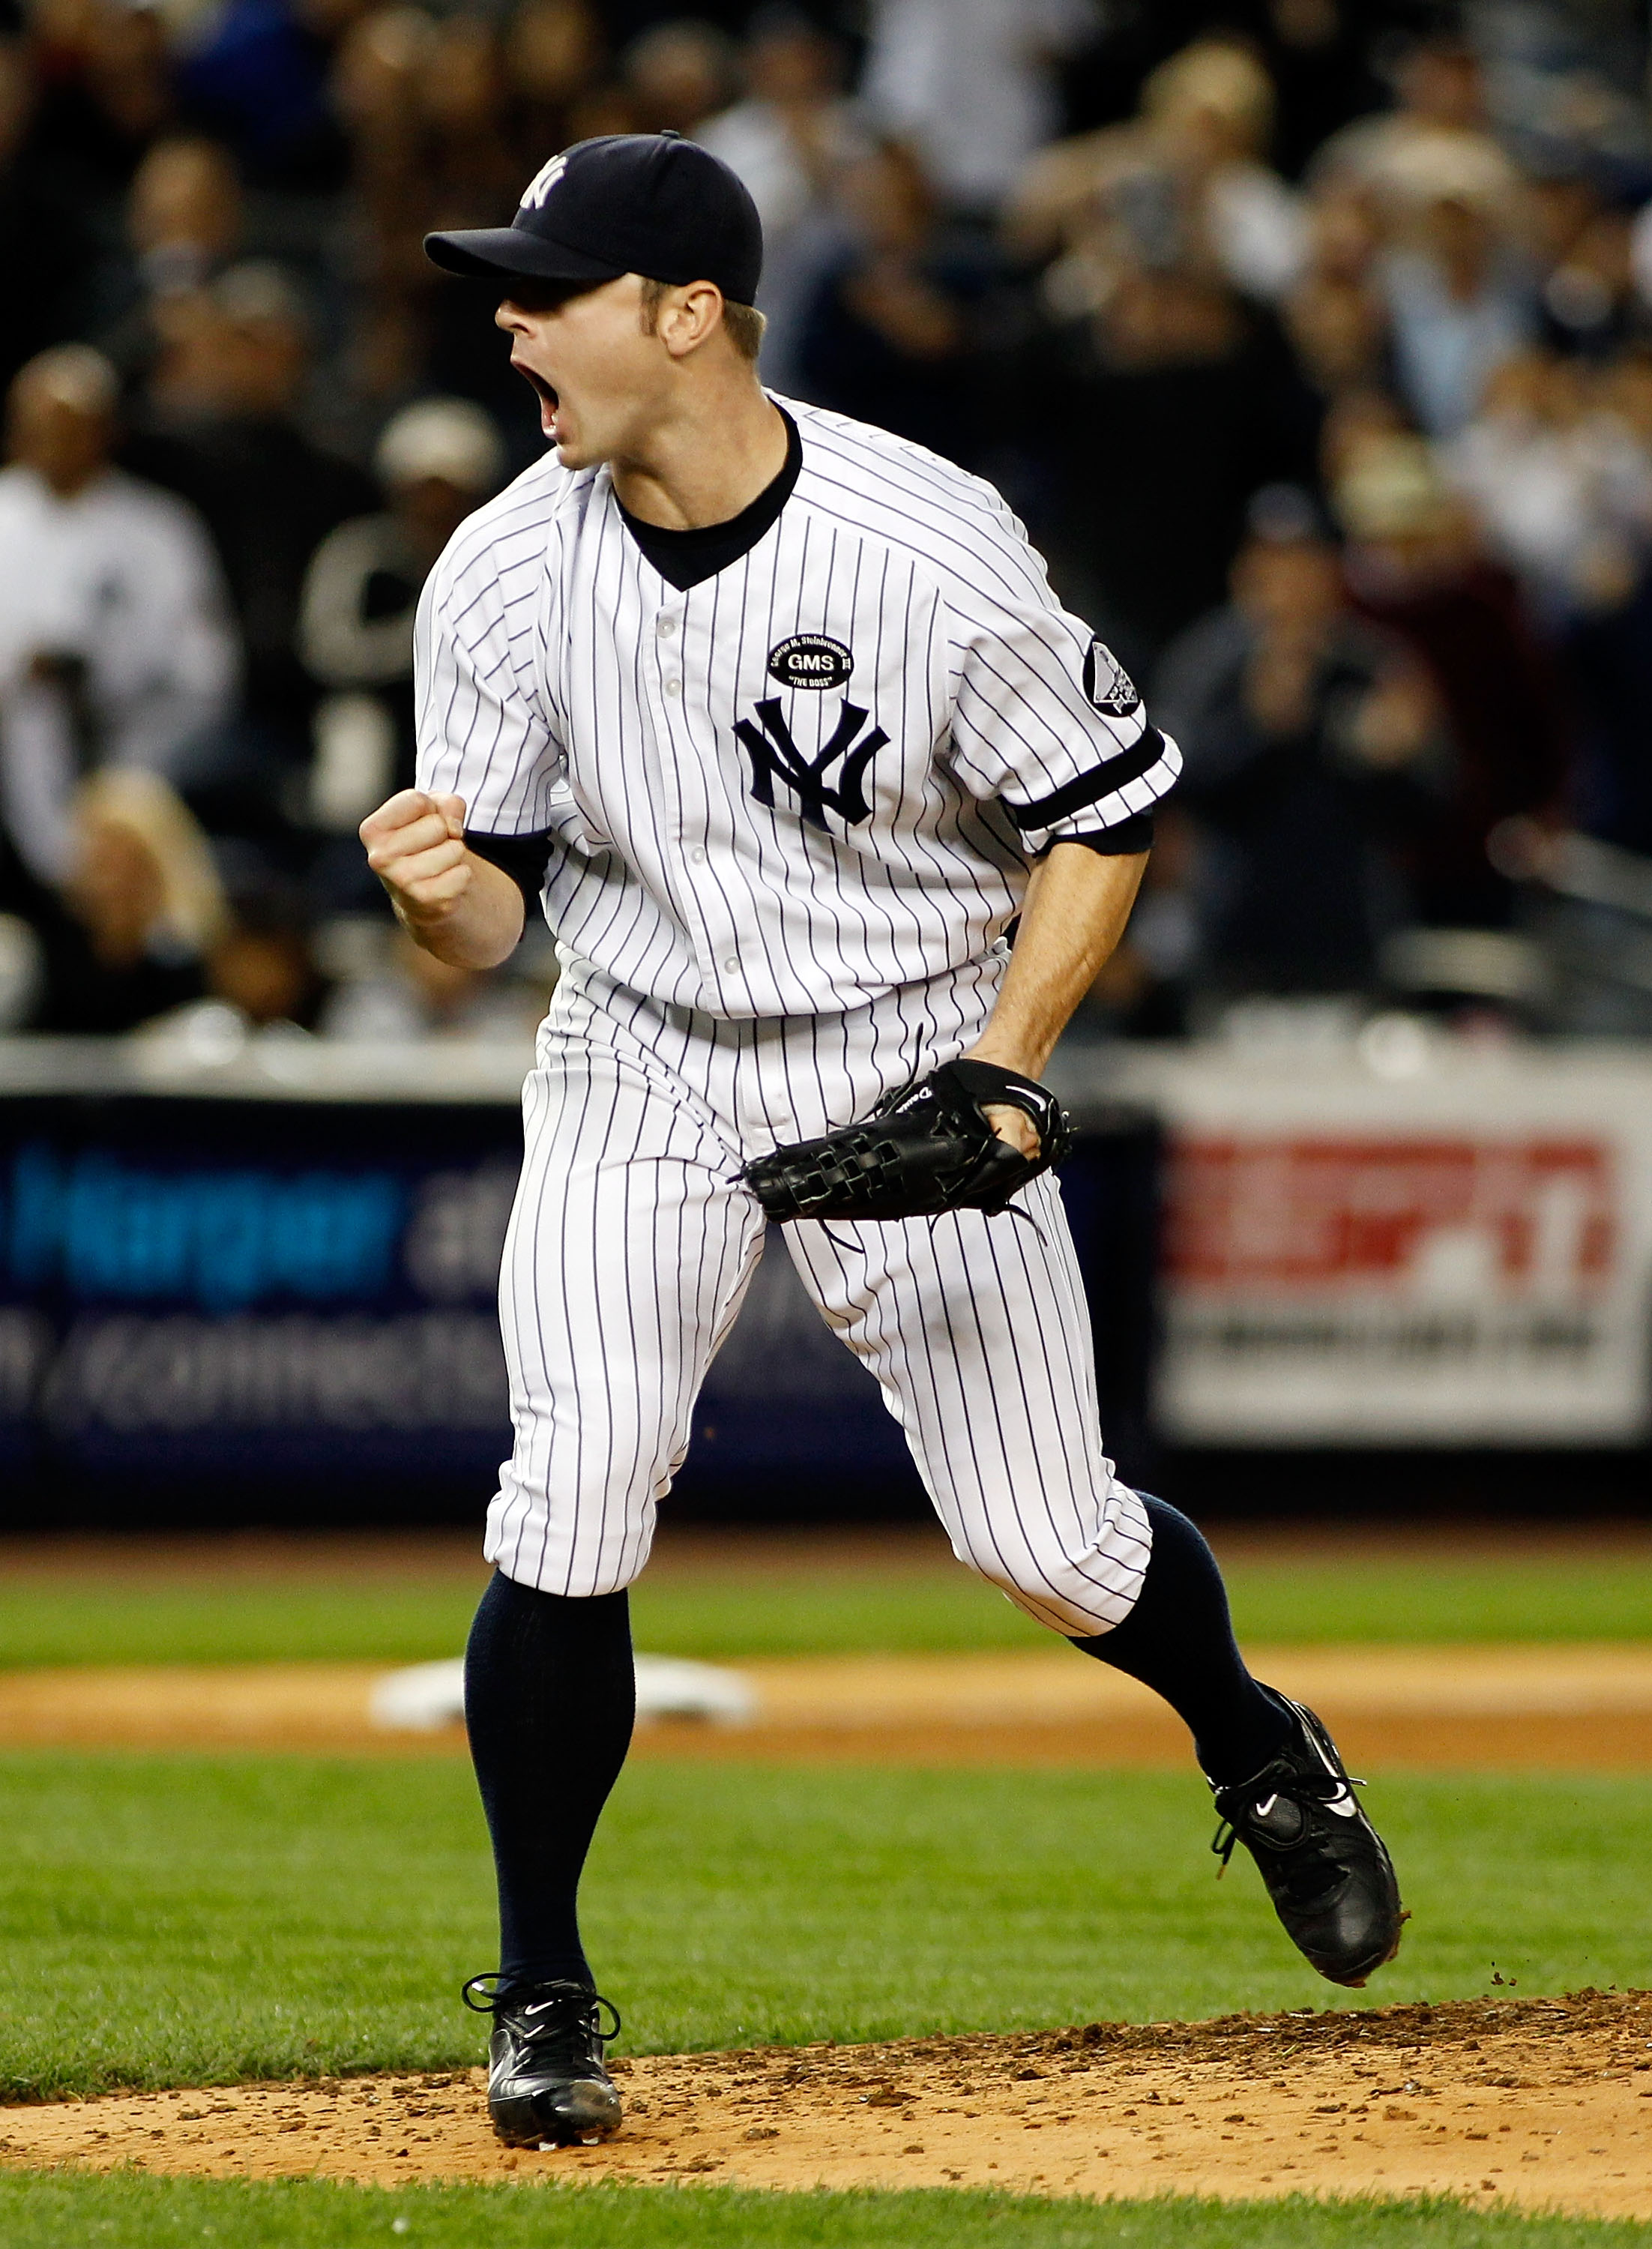 NEW YORK - SEPTEMBER 26:  David Robertson #30 of the New York Yankees pumps his fist after striking out Lars Anderson (not shown) of the Boston Red Sox in the seventh-inning on September 26, 2010 at Yankee Stadium in the Bronx borough of New York City.  (